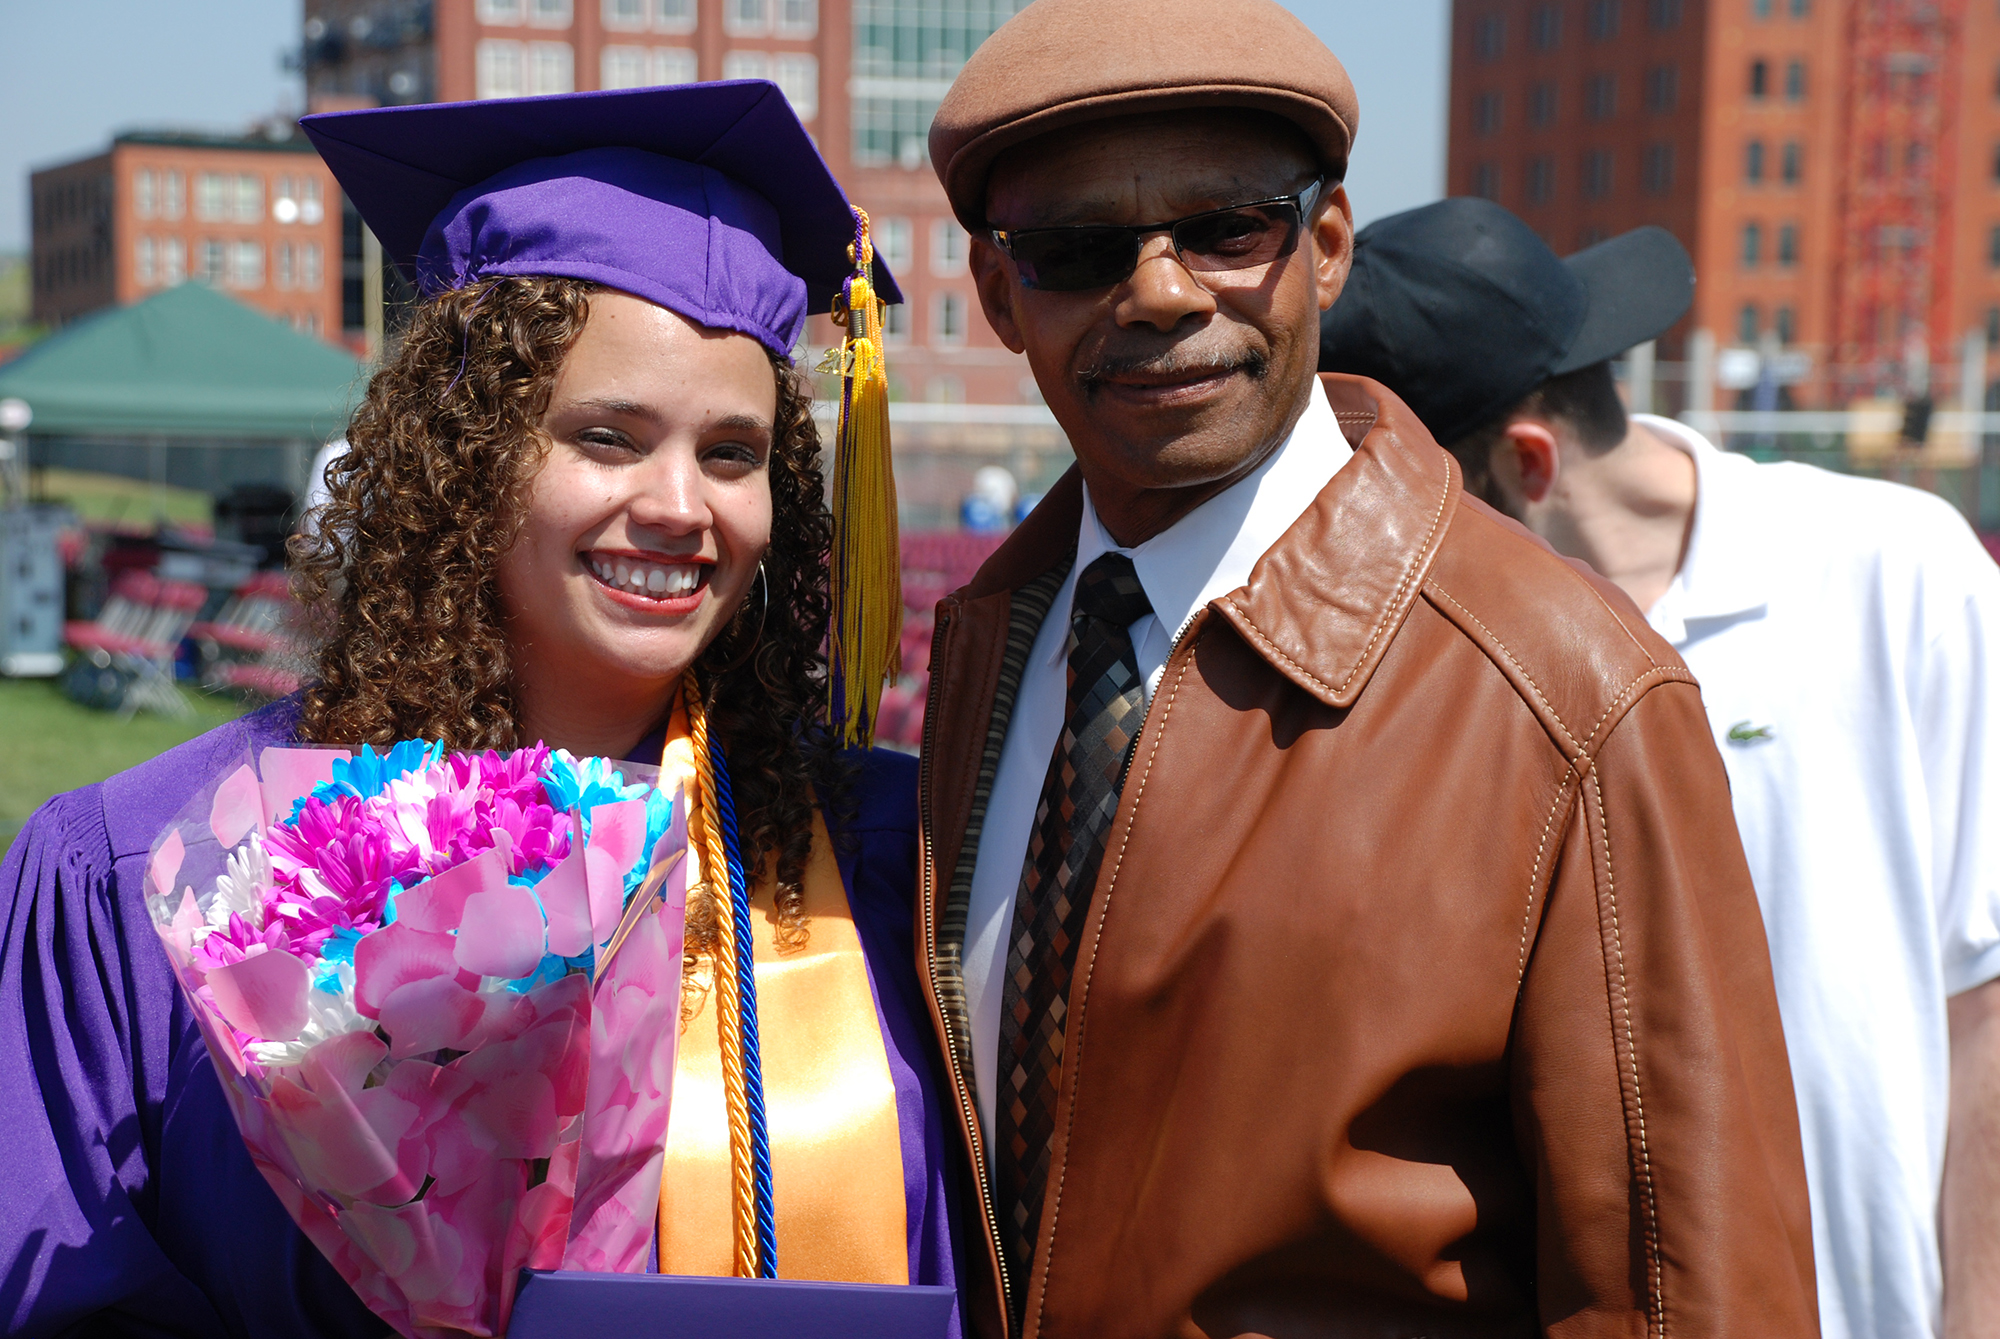 Female CCD graduate standing next to a man after Commencement Ceremony.